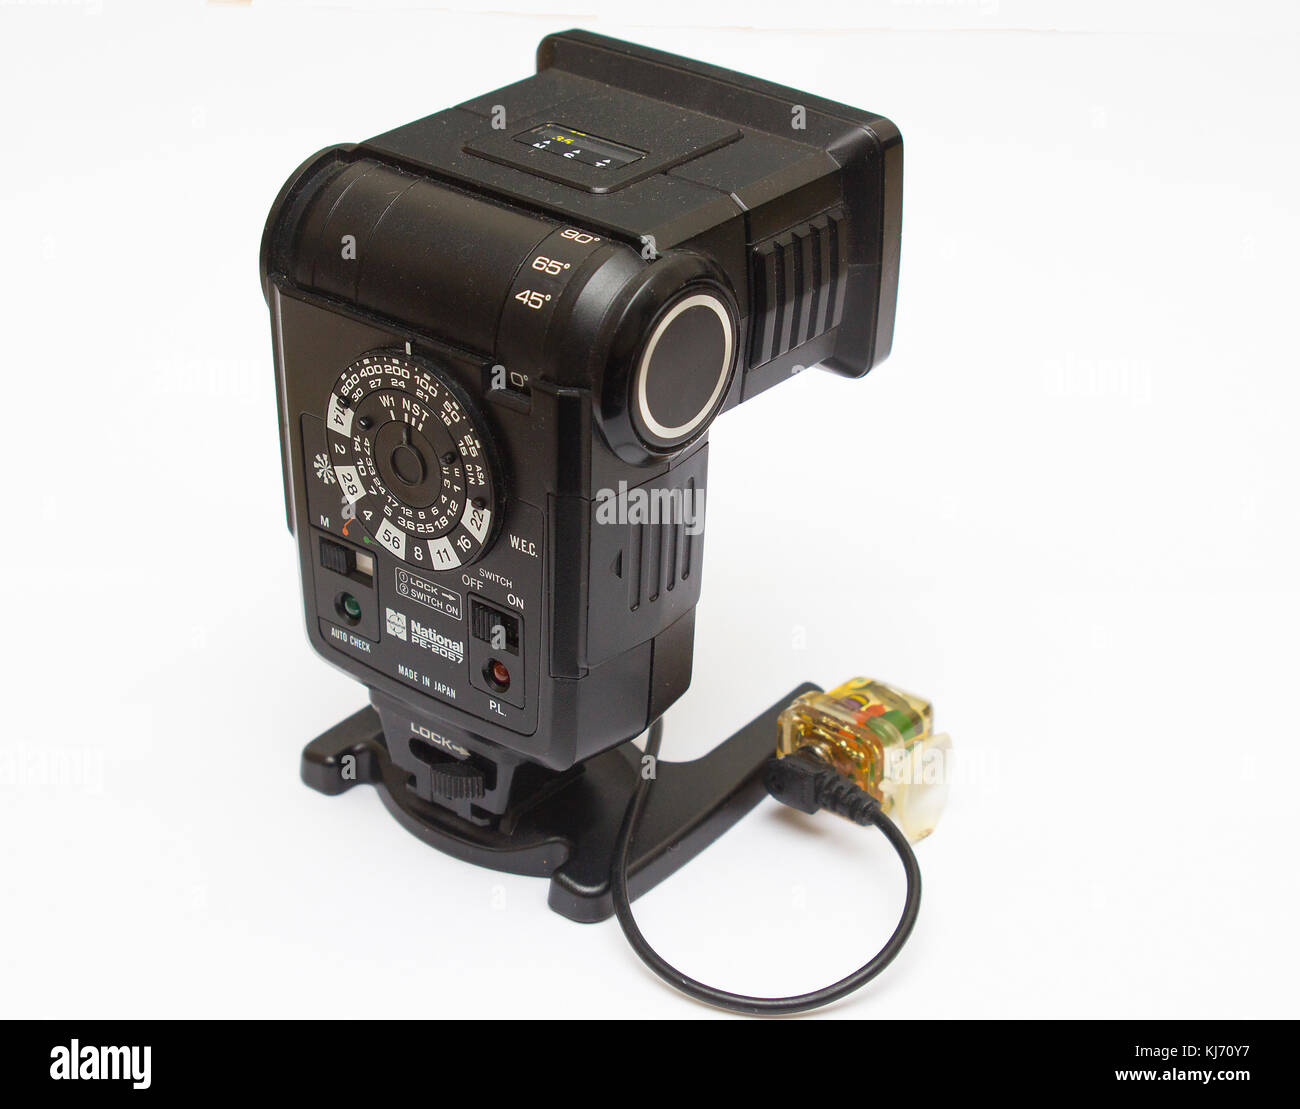 An old dusty National photographic flash unit from the film era that has been adapted for permanent use as a remote flash unit with a peanut slave fla Stock Photo